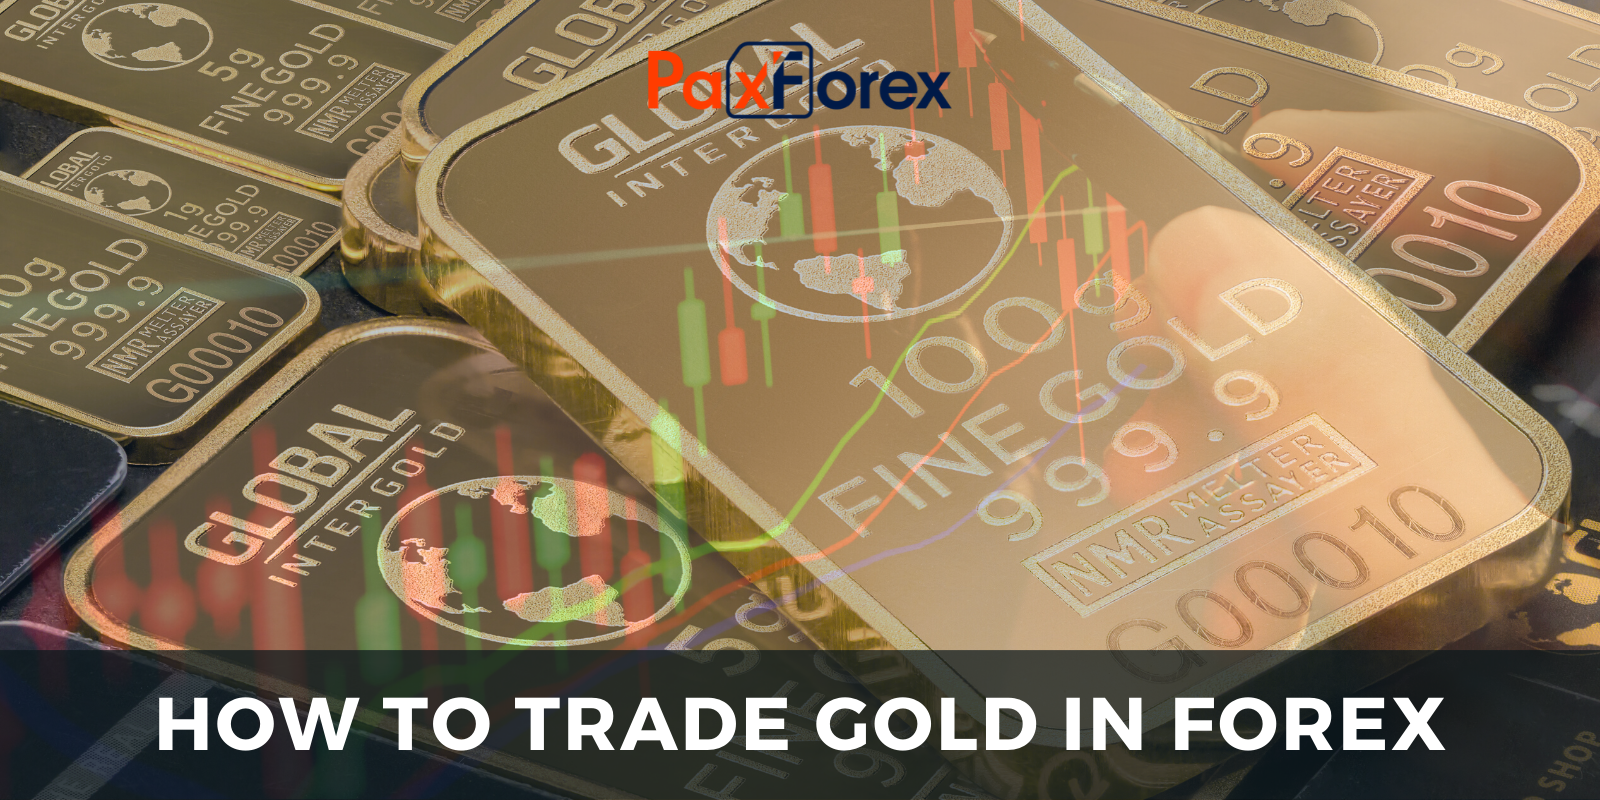 How to trade gold in Forex